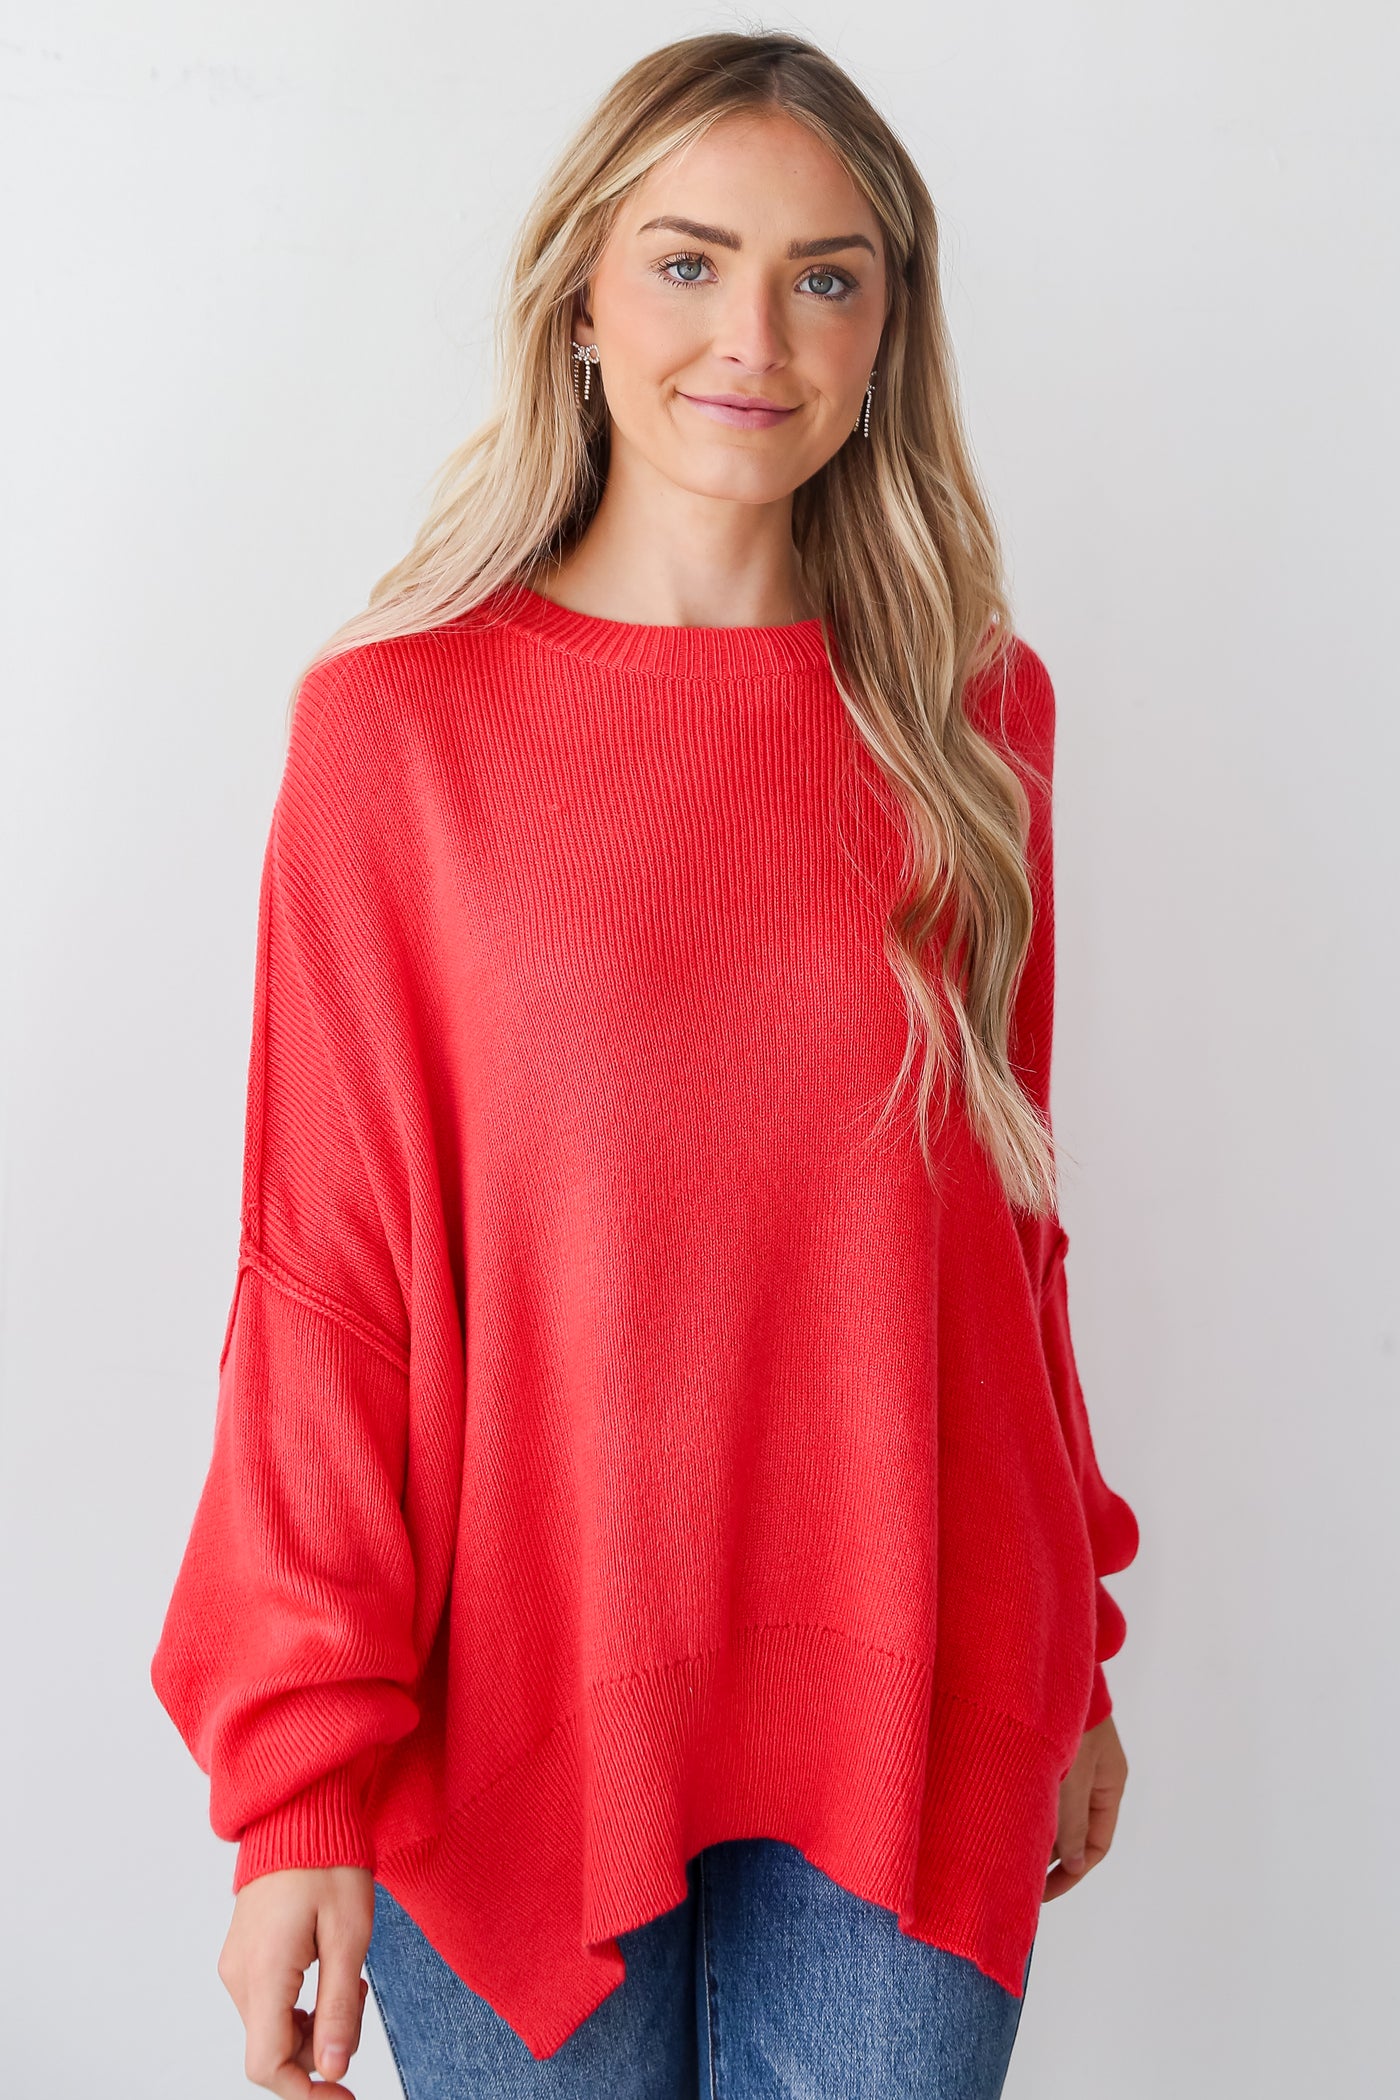 red Oversized Sweater front view